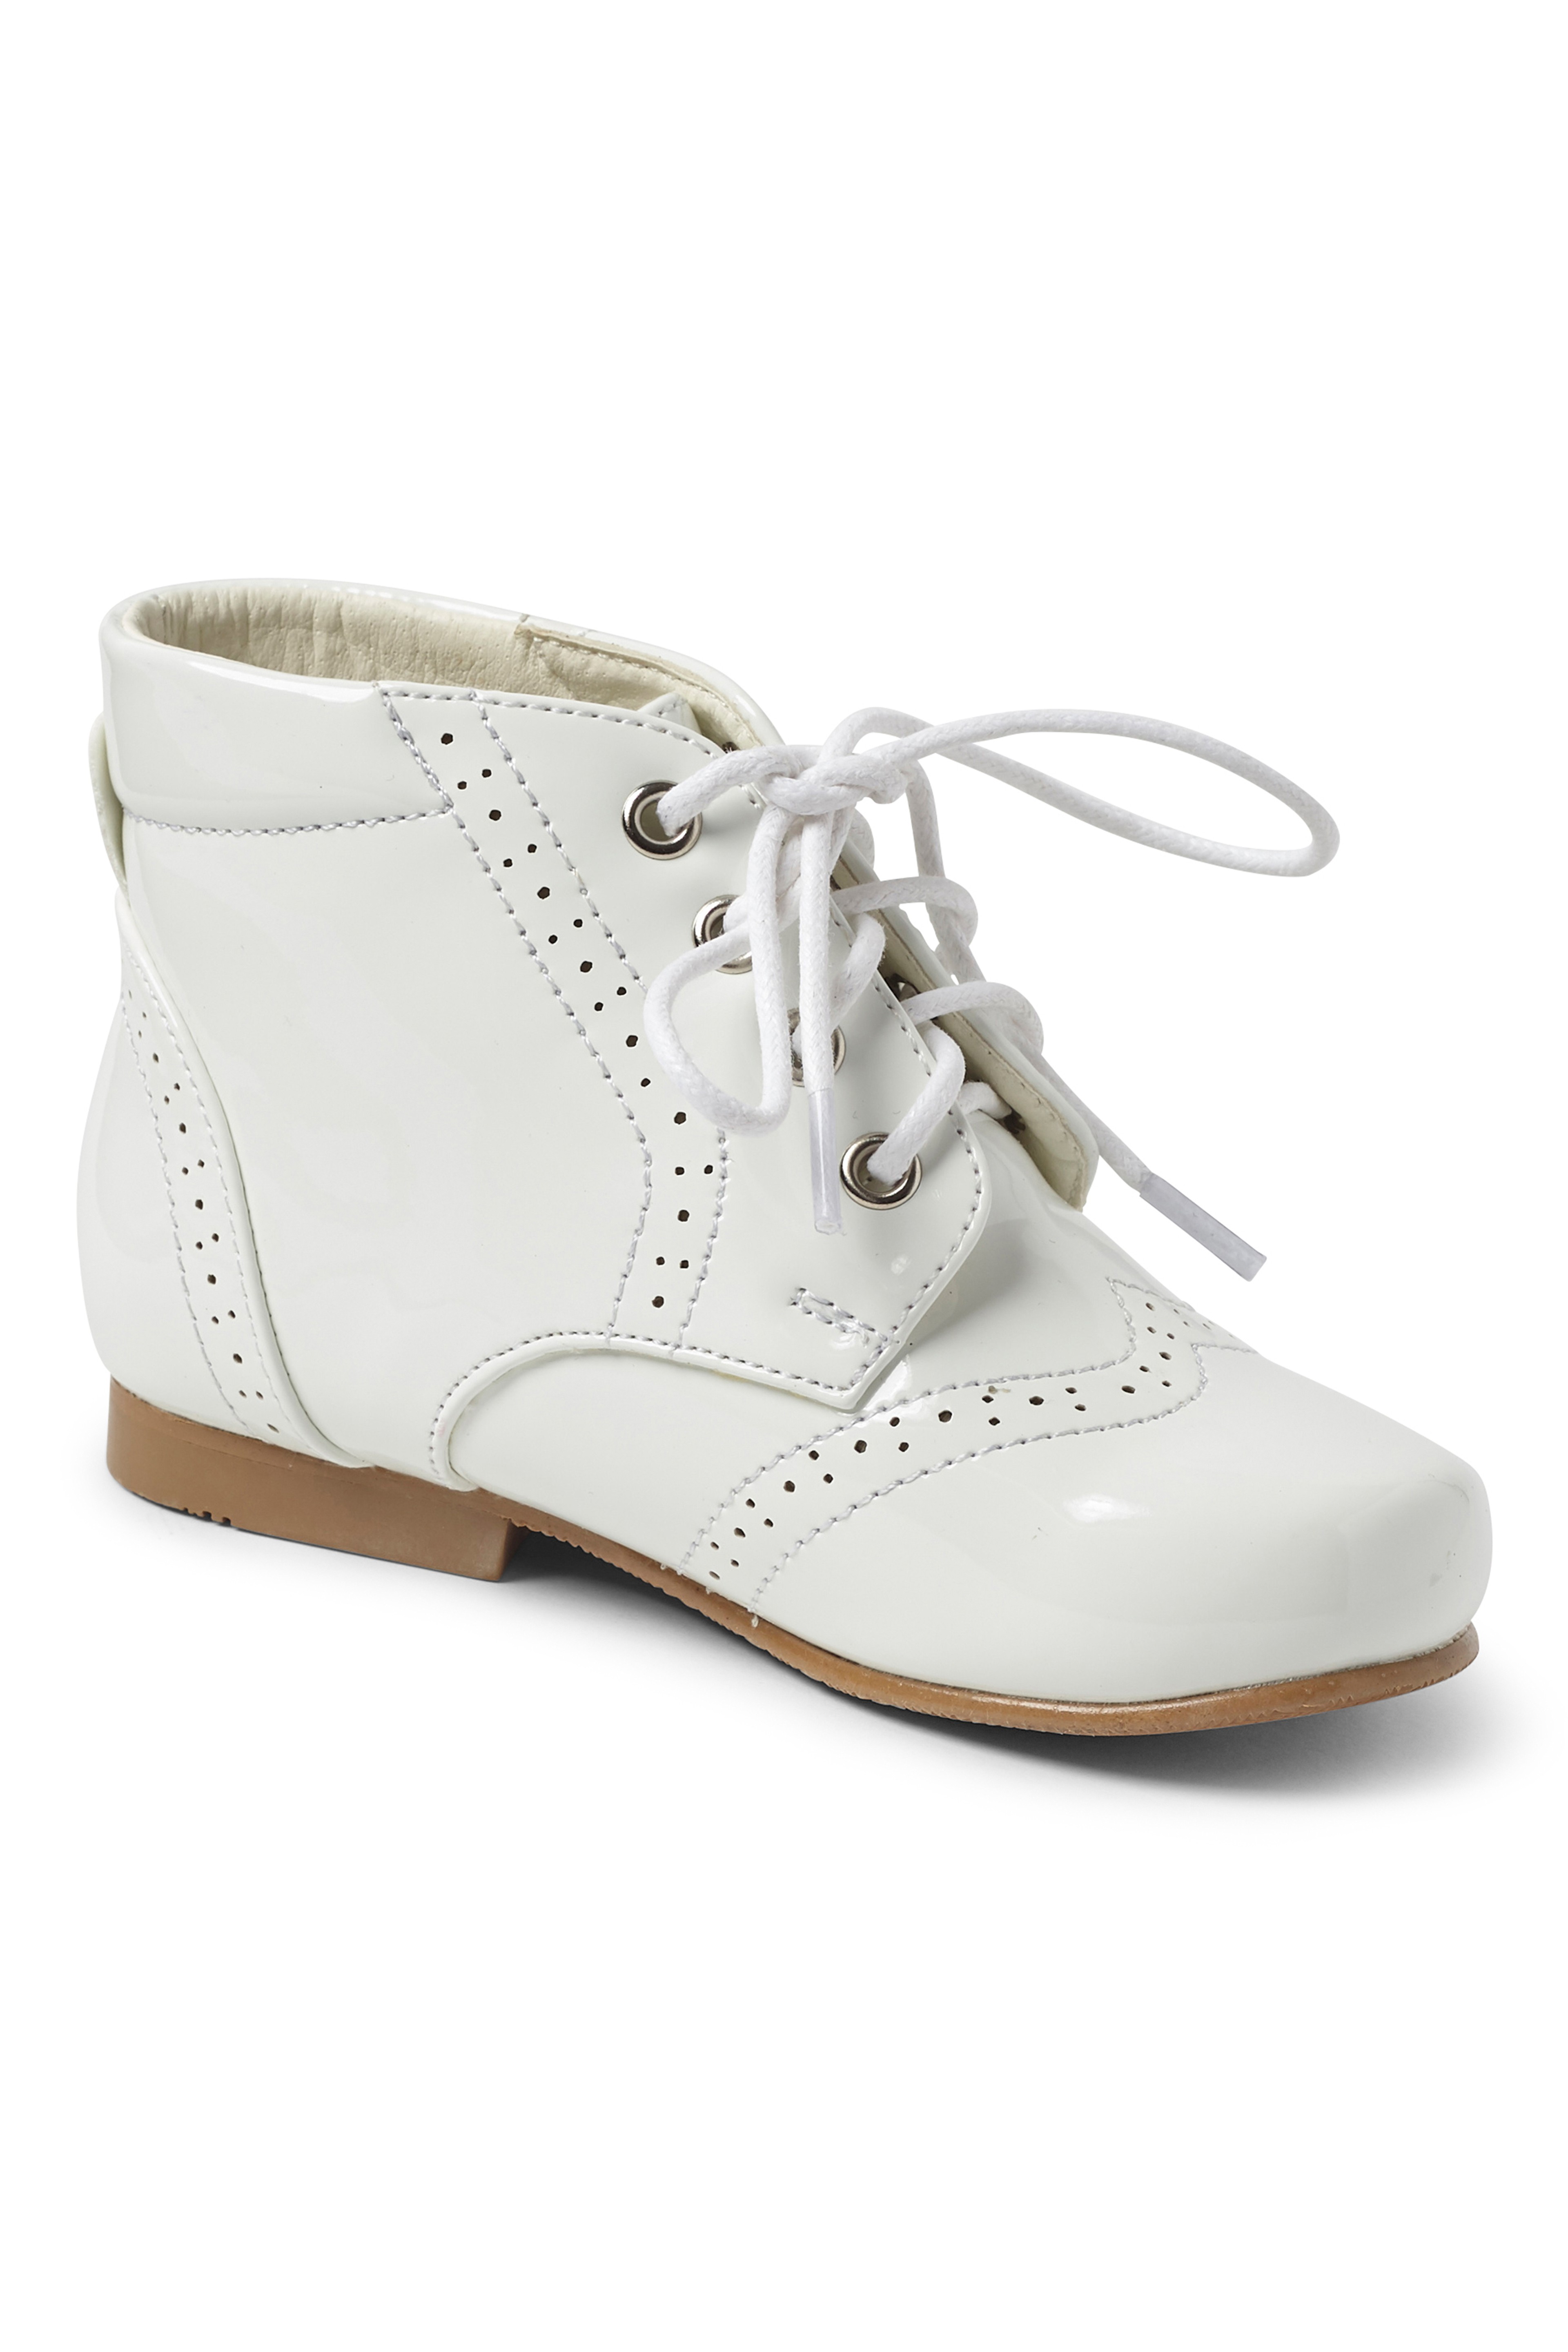 Unisex Kids Patent Leather Brogue Ankle Boots - QUINN  - White